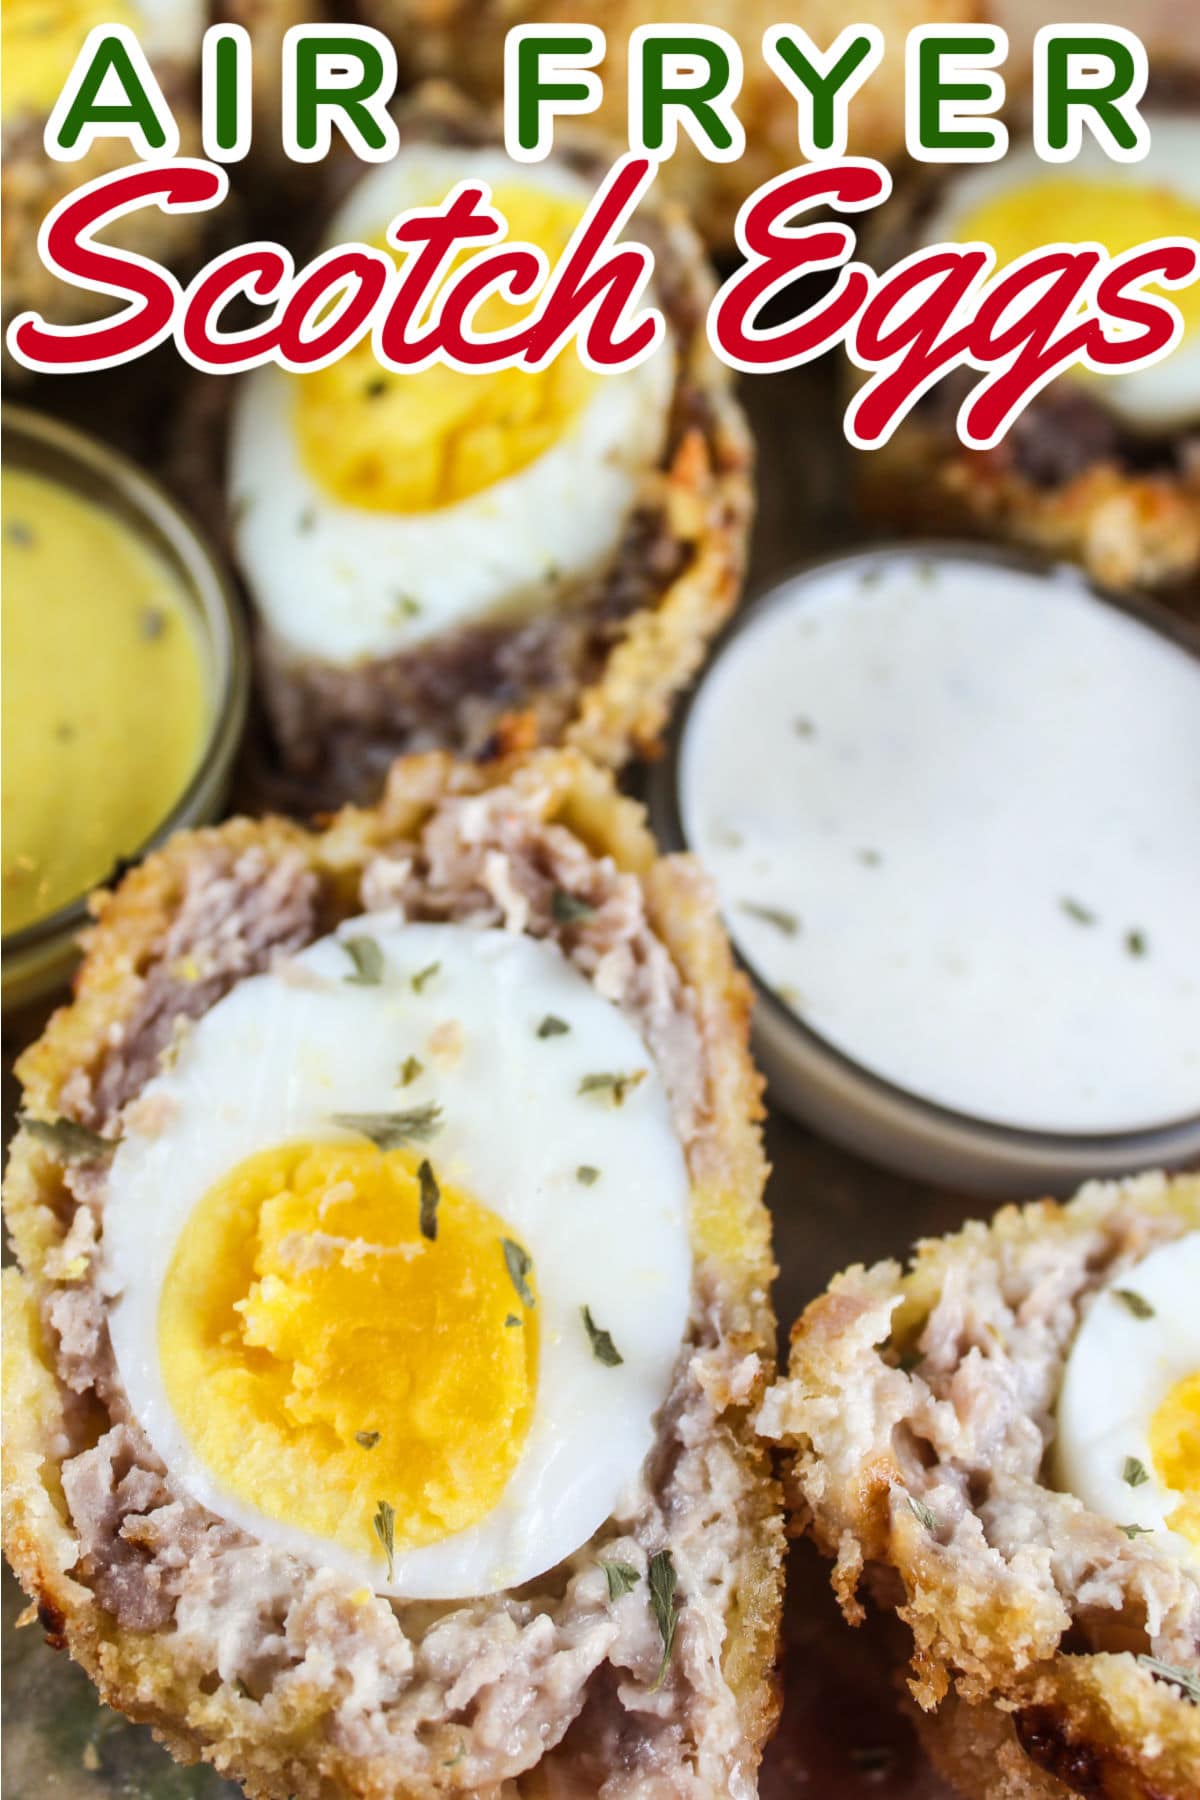 Air Fryer Scotch Eggs are my new favorite breakfast treat! It's sausage and eggs all in one delightful crunchy bite! They're fun to make too - and you can do the whole thing in air fryer! via @foodhussy